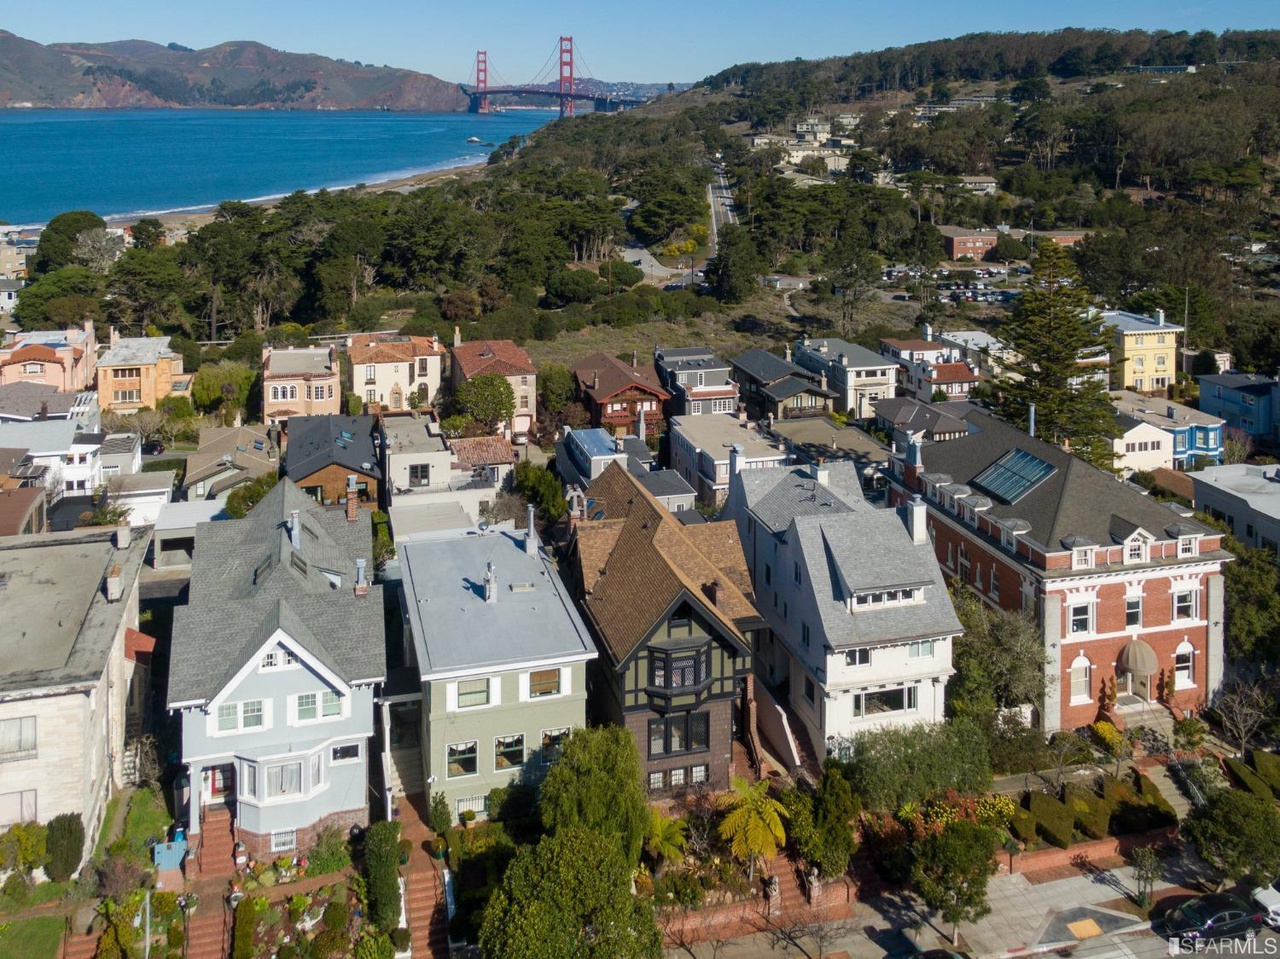 Property Photo: Aerial view of 2212 Lake Street in San Francisco, showing views of the Golden Gate bridge